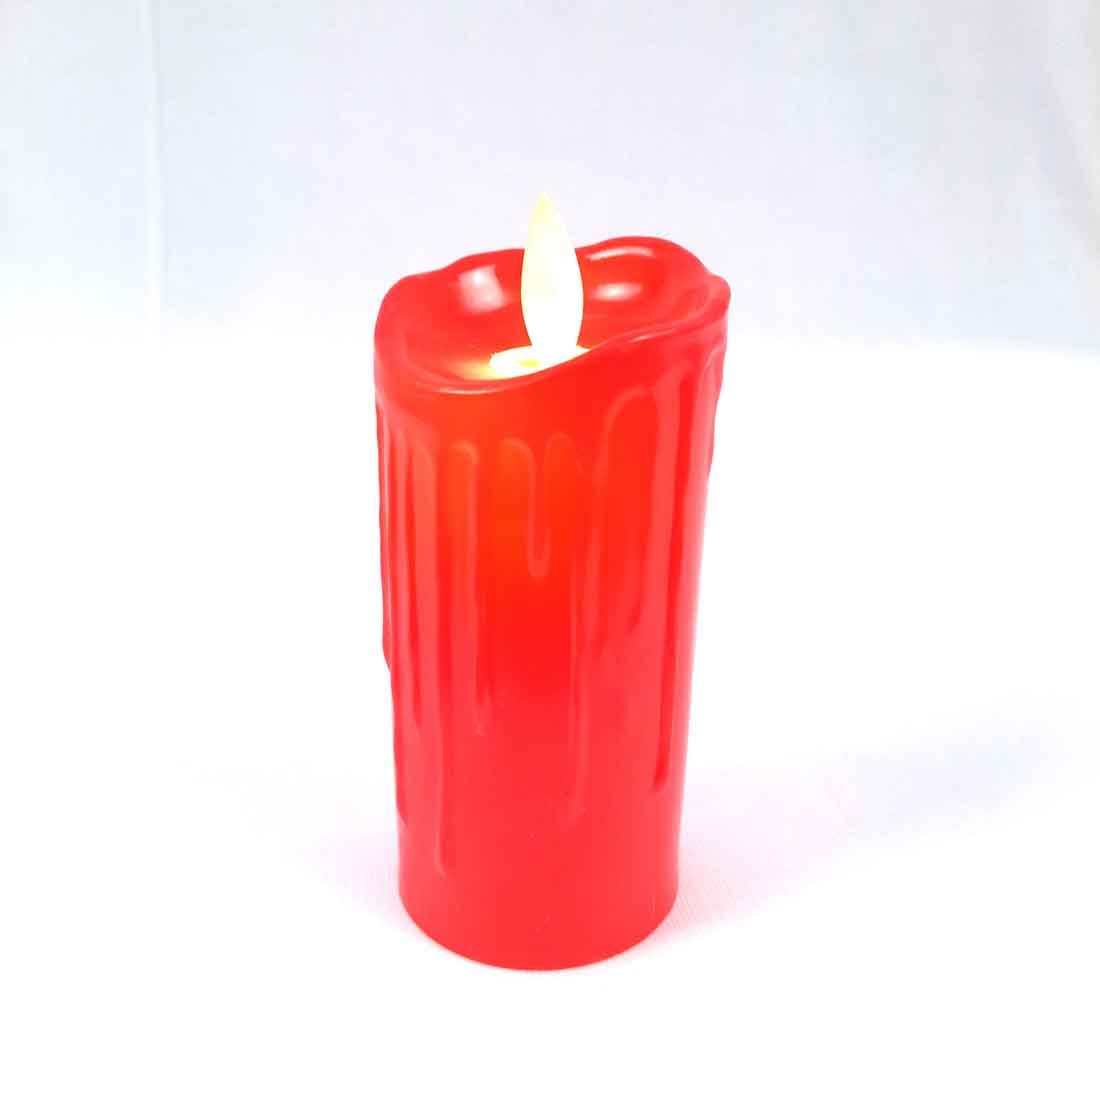 LED Candle  - For For Table & Home Decor - 5 Inches - ApkaMart